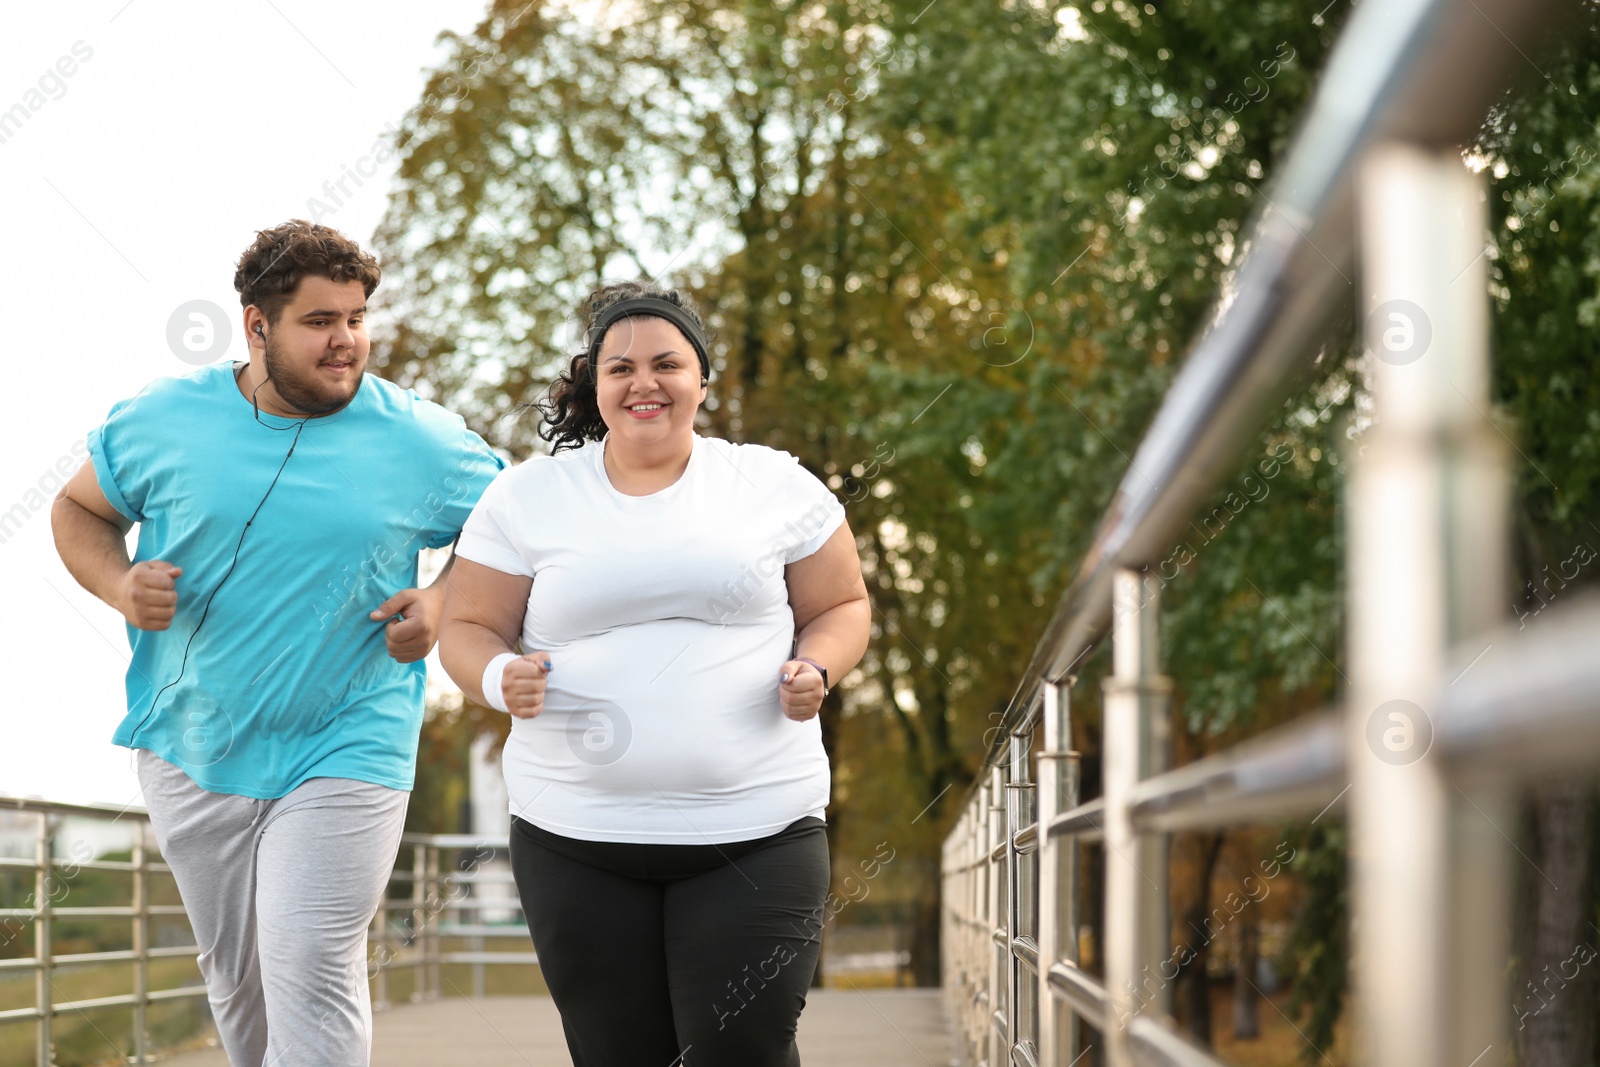 Photo of Overweight couple running together in park